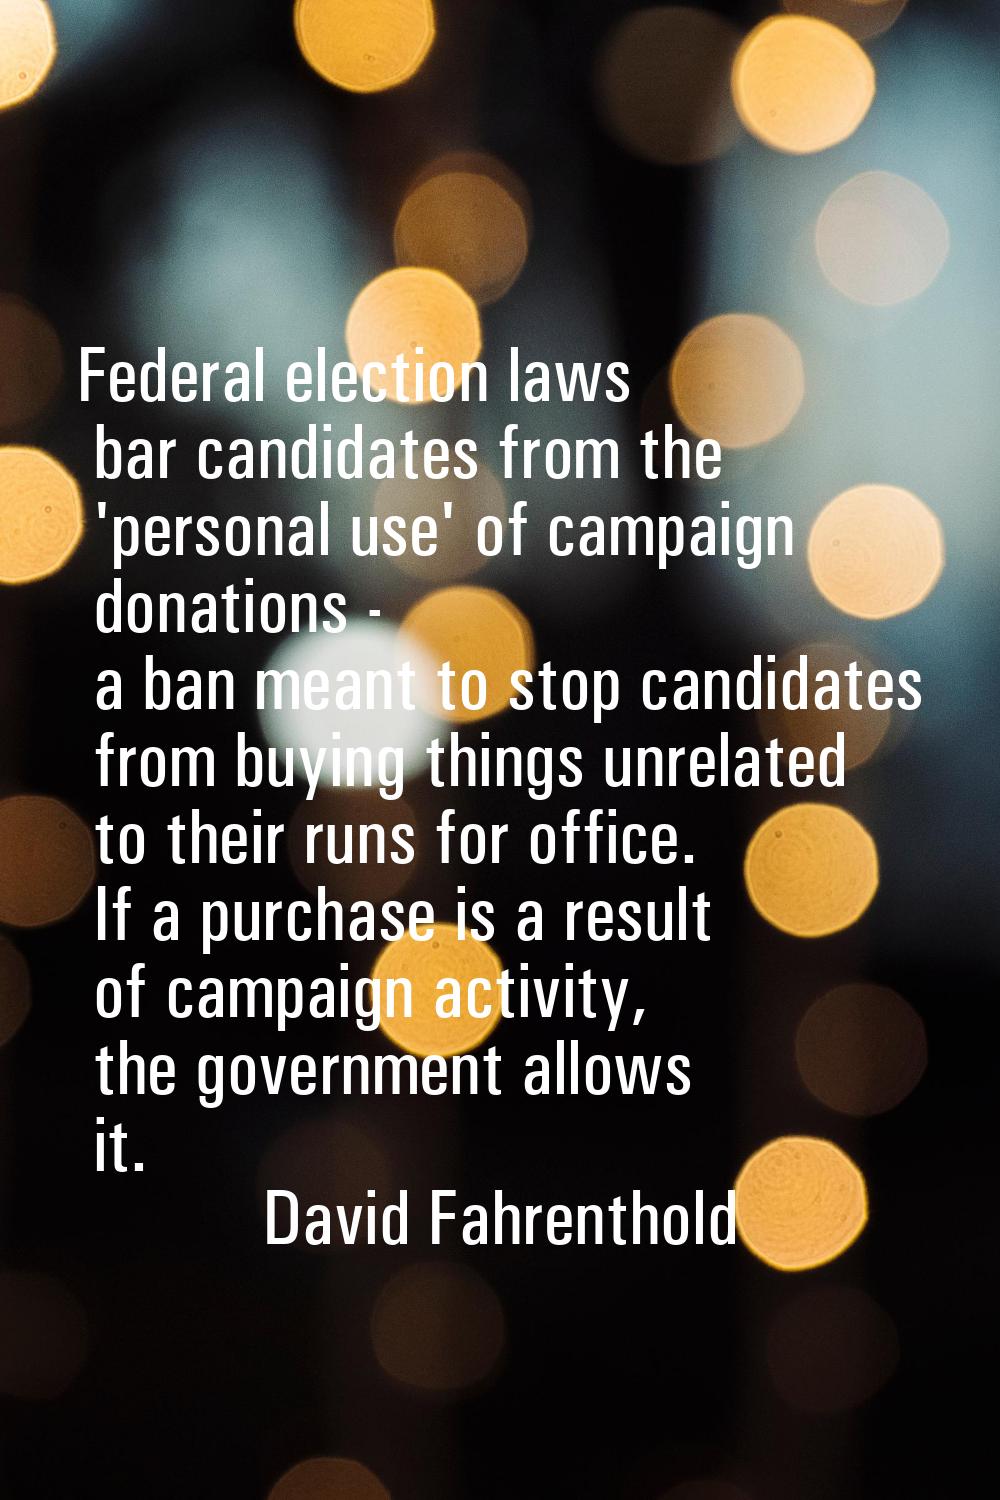 Federal election laws bar candidates from the 'personal use' of campaign donations - a ban meant to